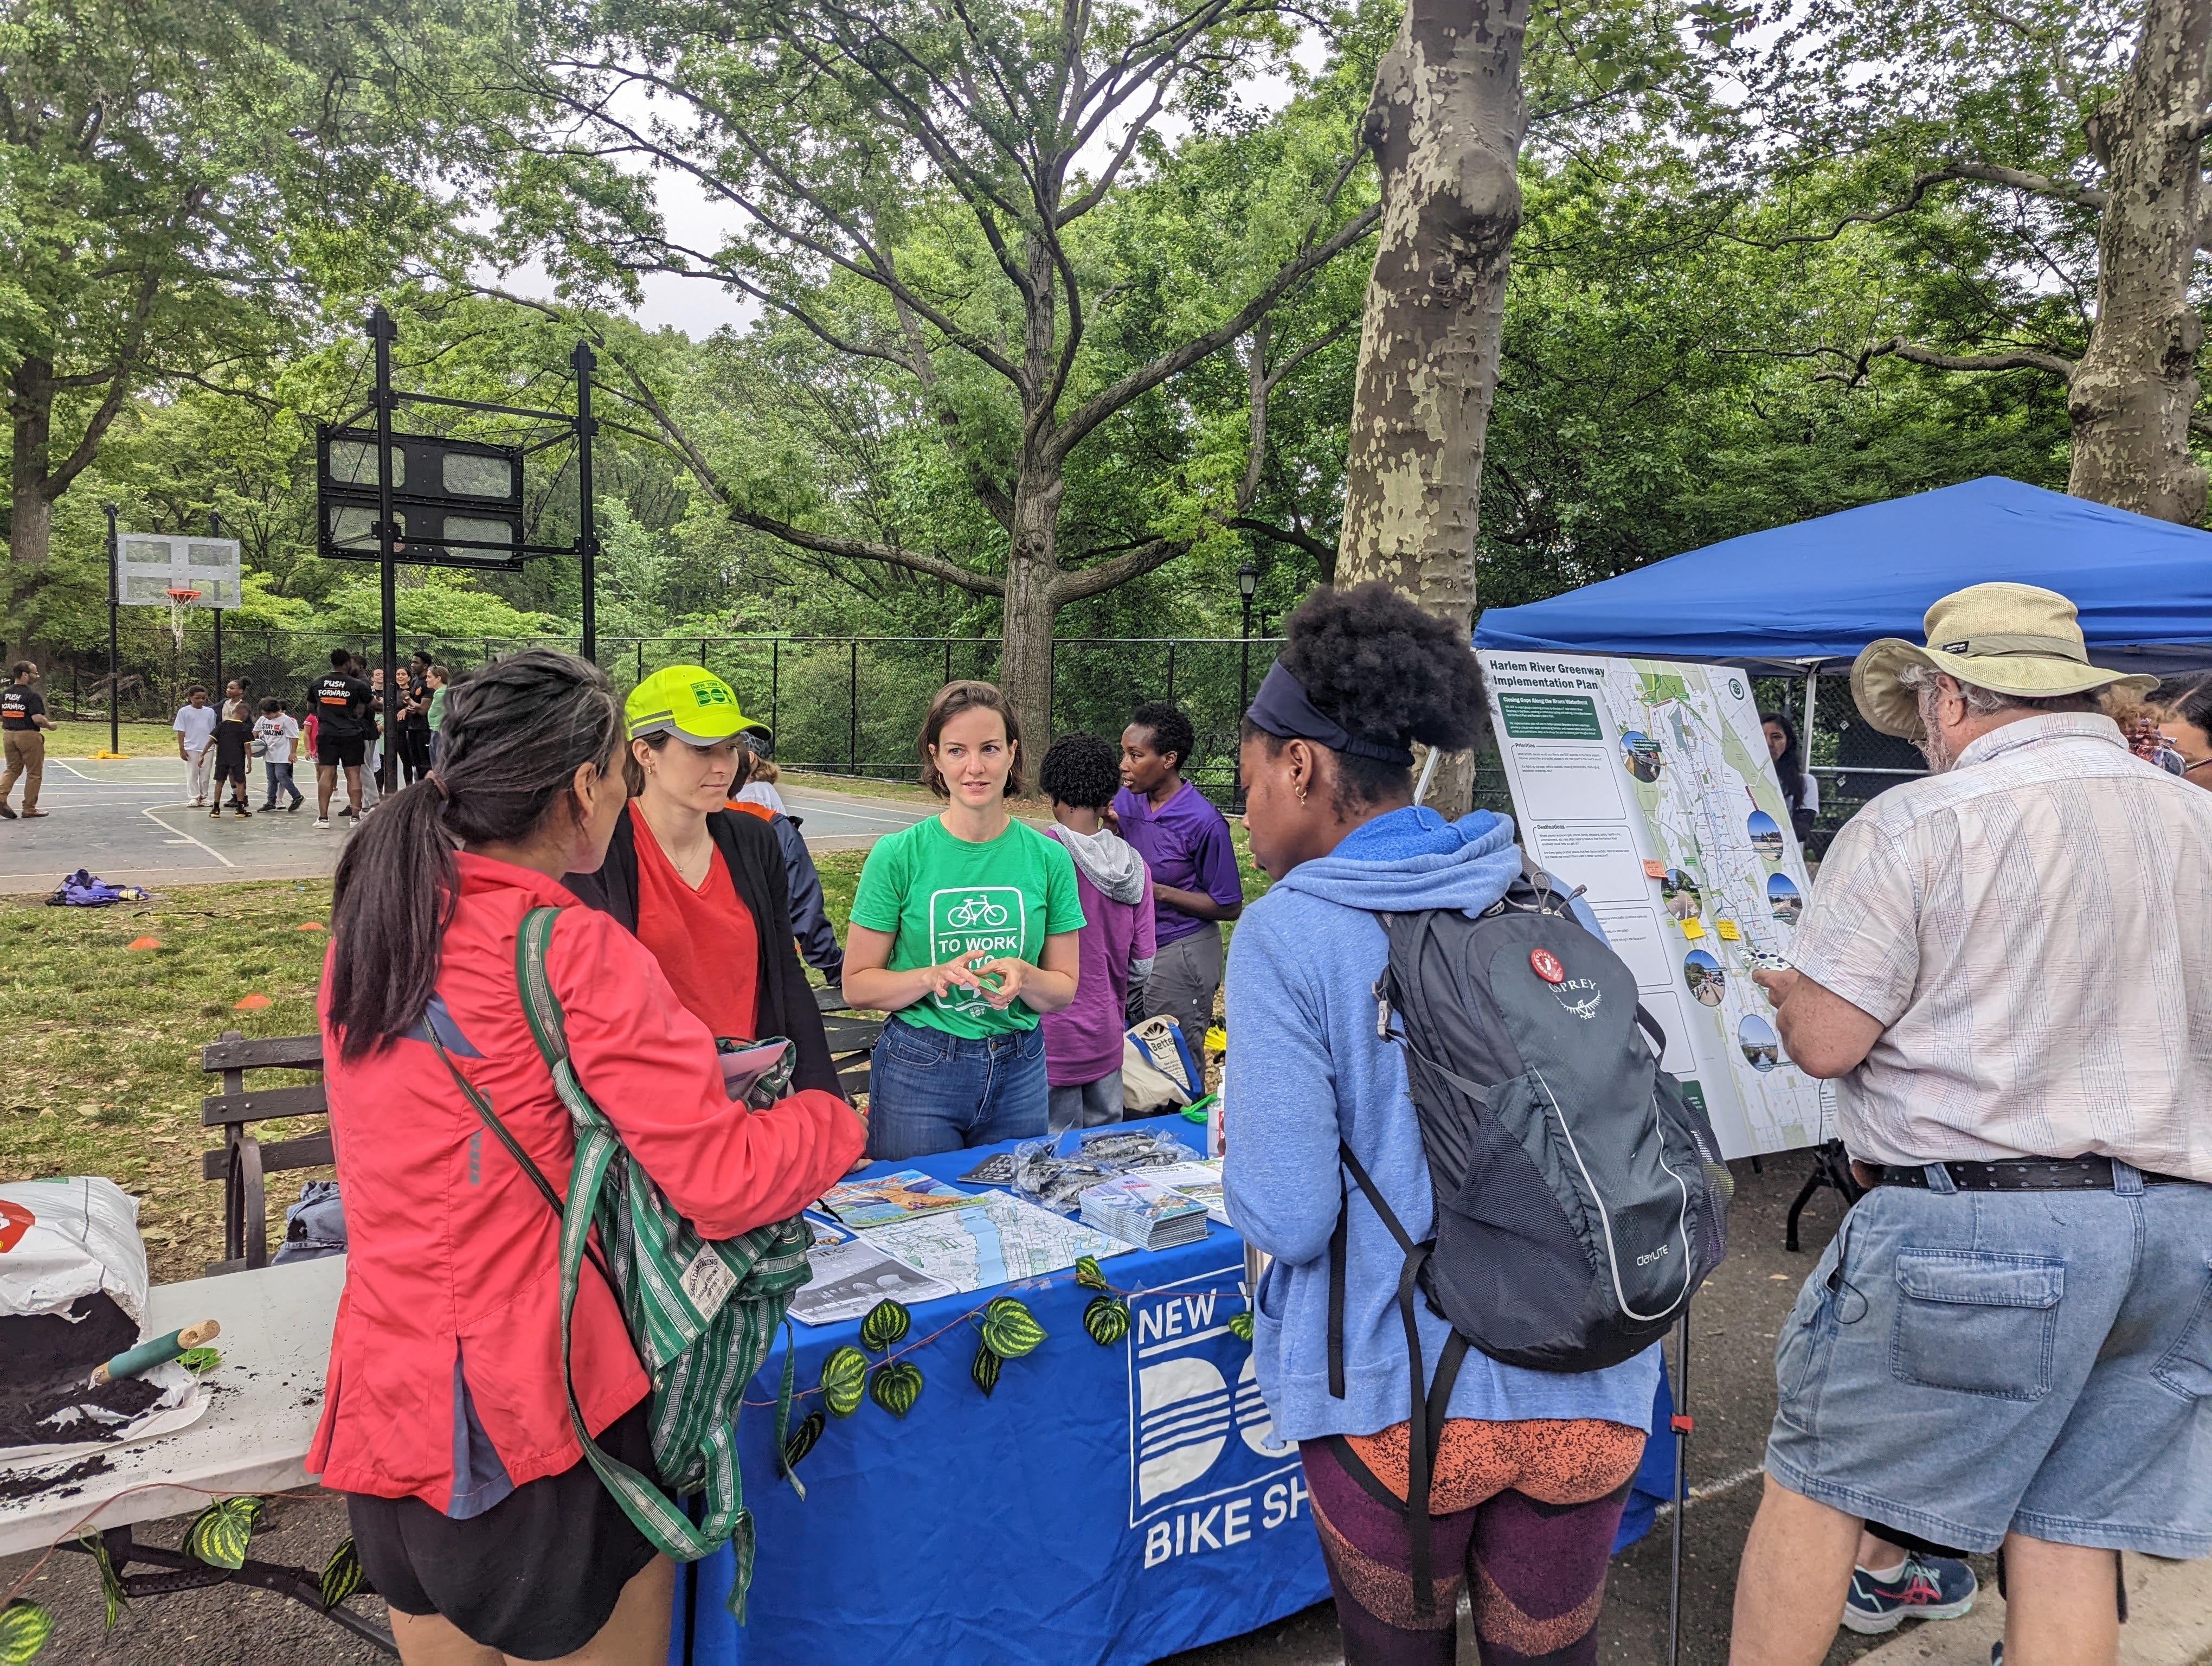 DOT staff talk with community members about the Harlem River Greenway planning process while tabling at a park in the Bronx.